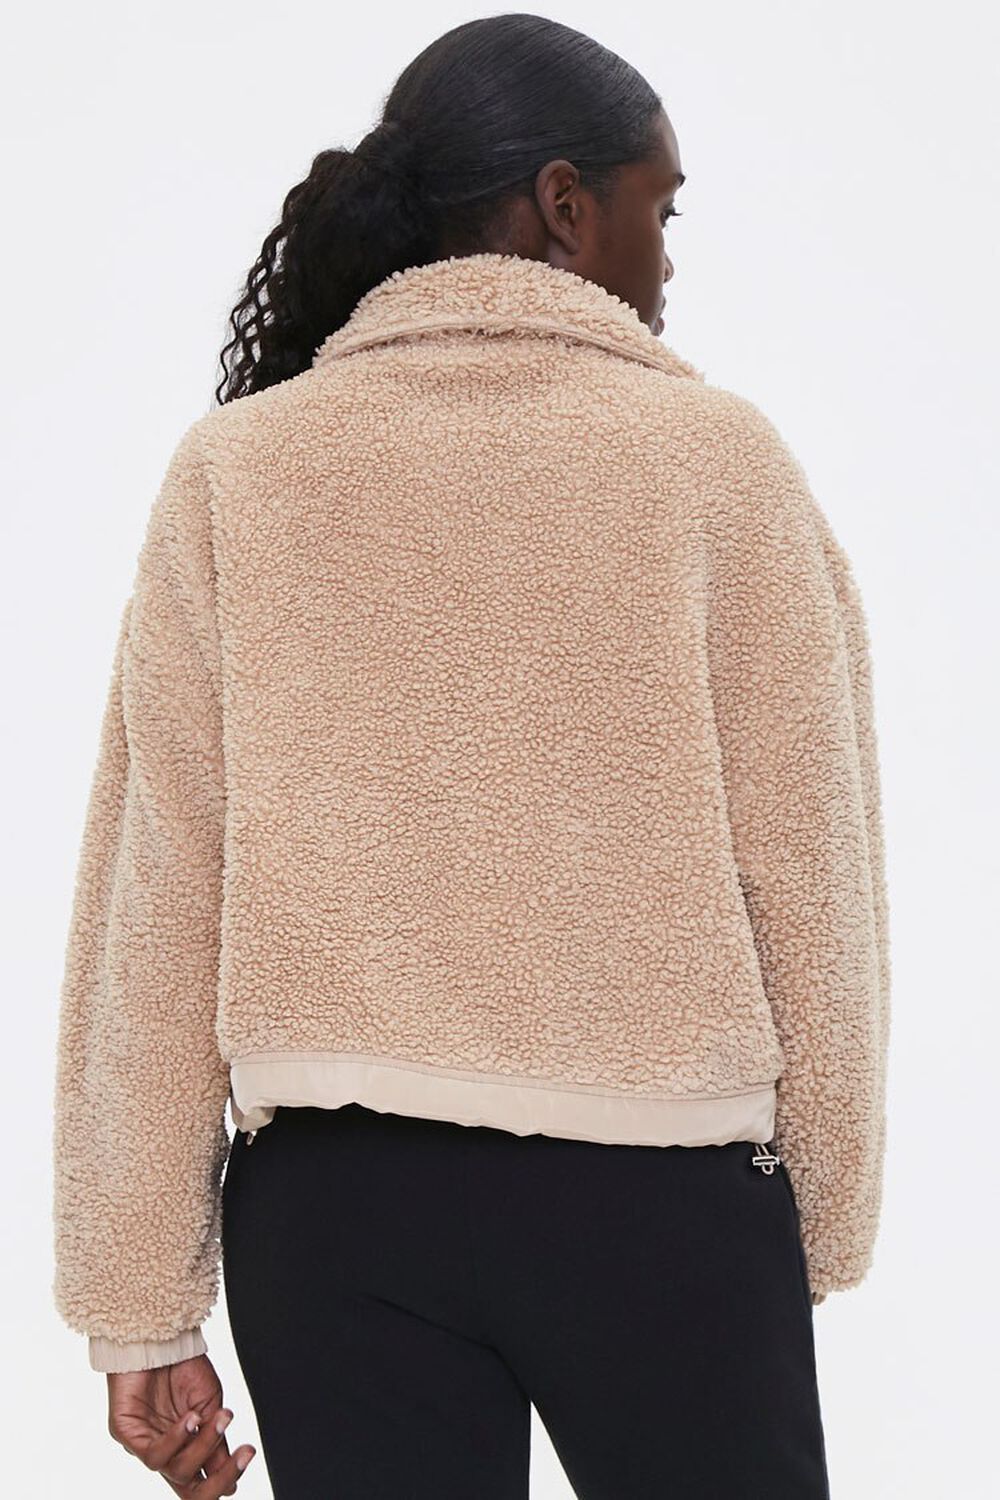 TAUPE Faux Shearling Zip-Up Jacket, image 3